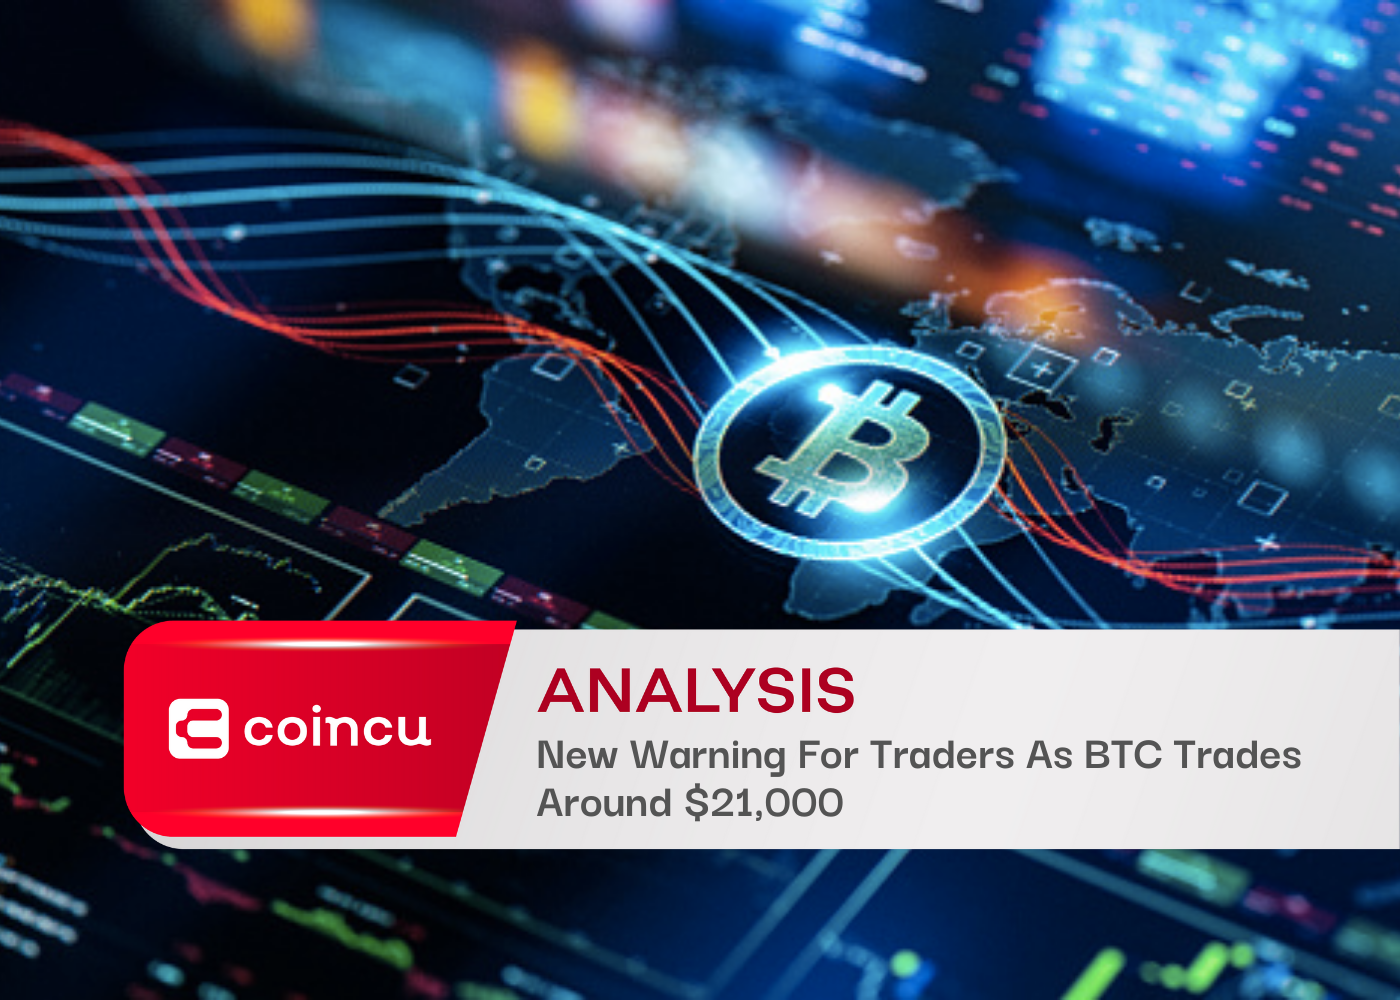 New Warning For Traders As BTC Trades Around $21,000